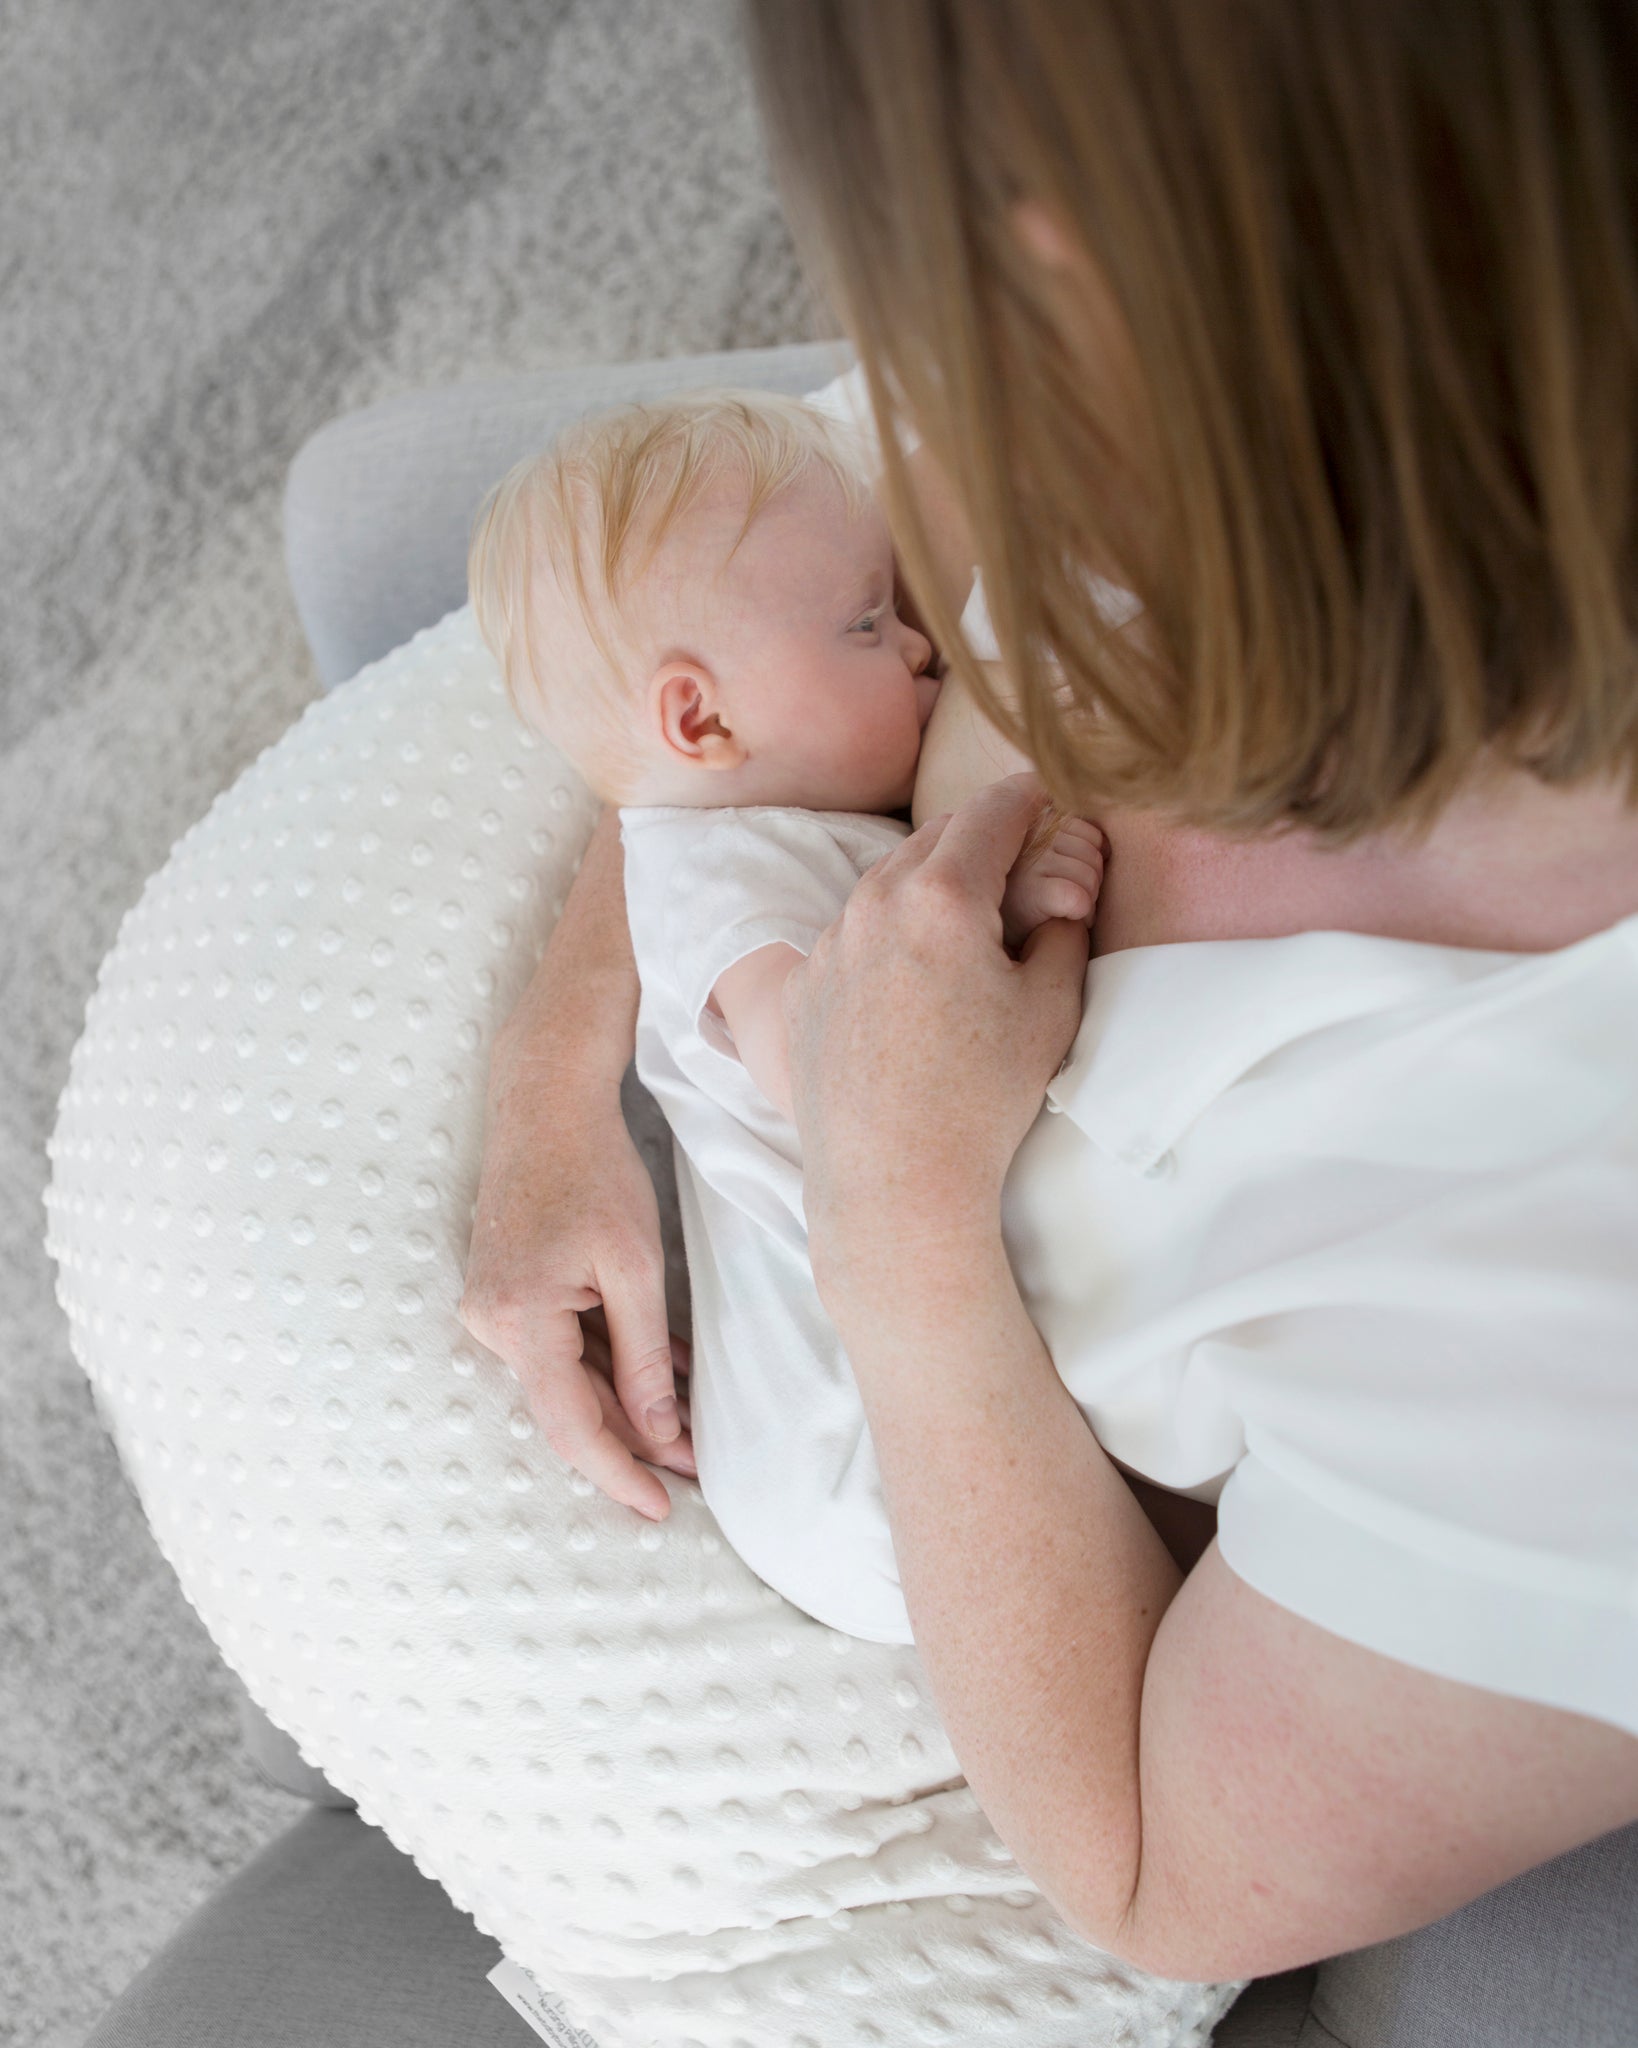 Nursing pillow - Nettle Scatter - Vancouver's Best Baby & Kids Store:  Unique Gifts, Toys, Clothing, Shoes, Boots, Baby Shower Gifts.